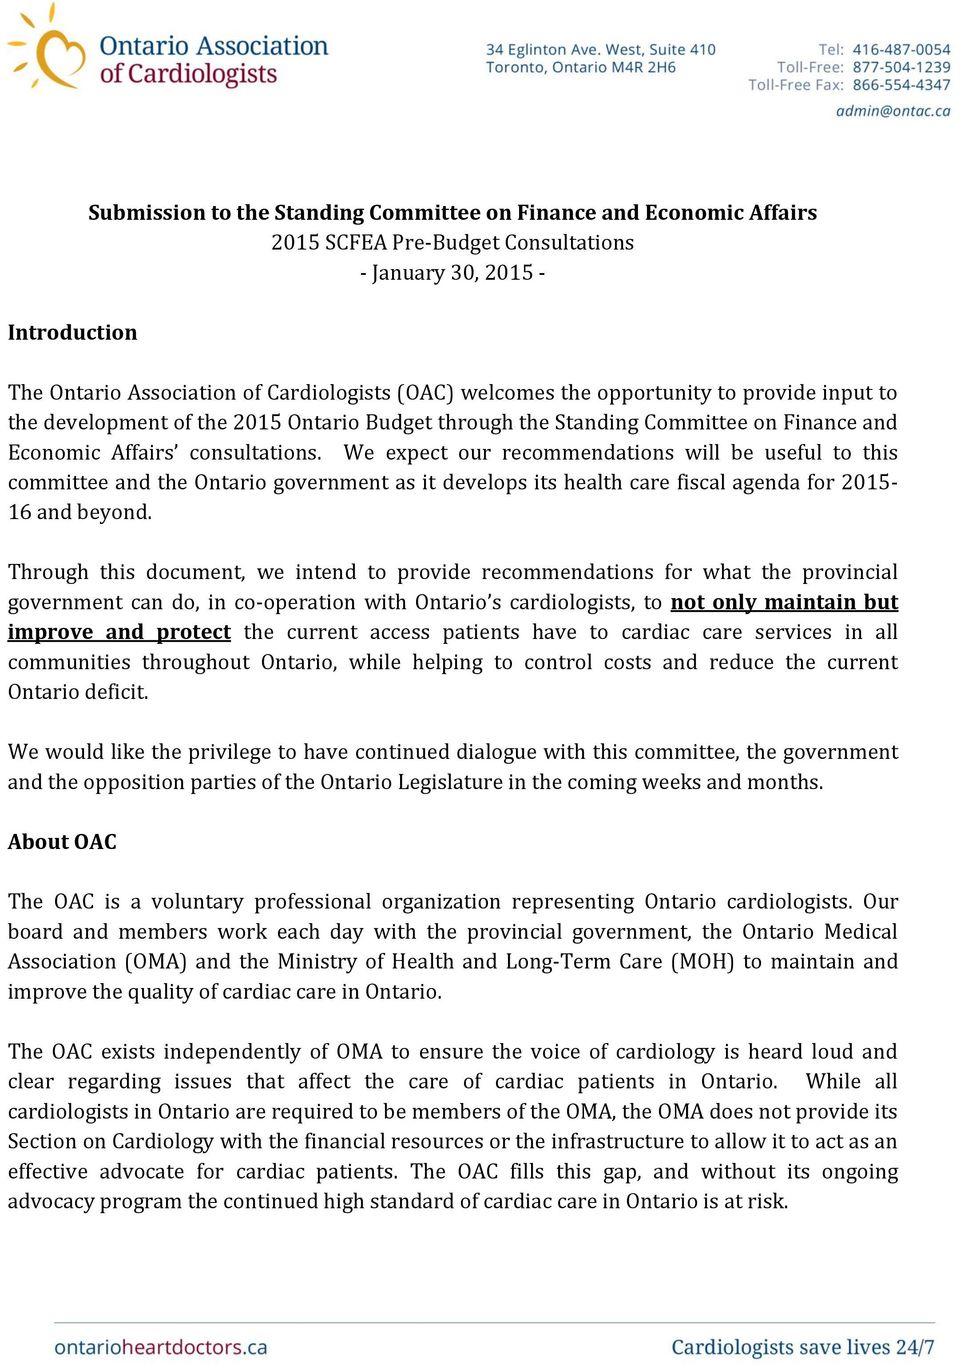 We expect our recommendations will be useful to this committee and the Ontario government as it develops its health care fiscal agenda for 2015-16 and beyond.